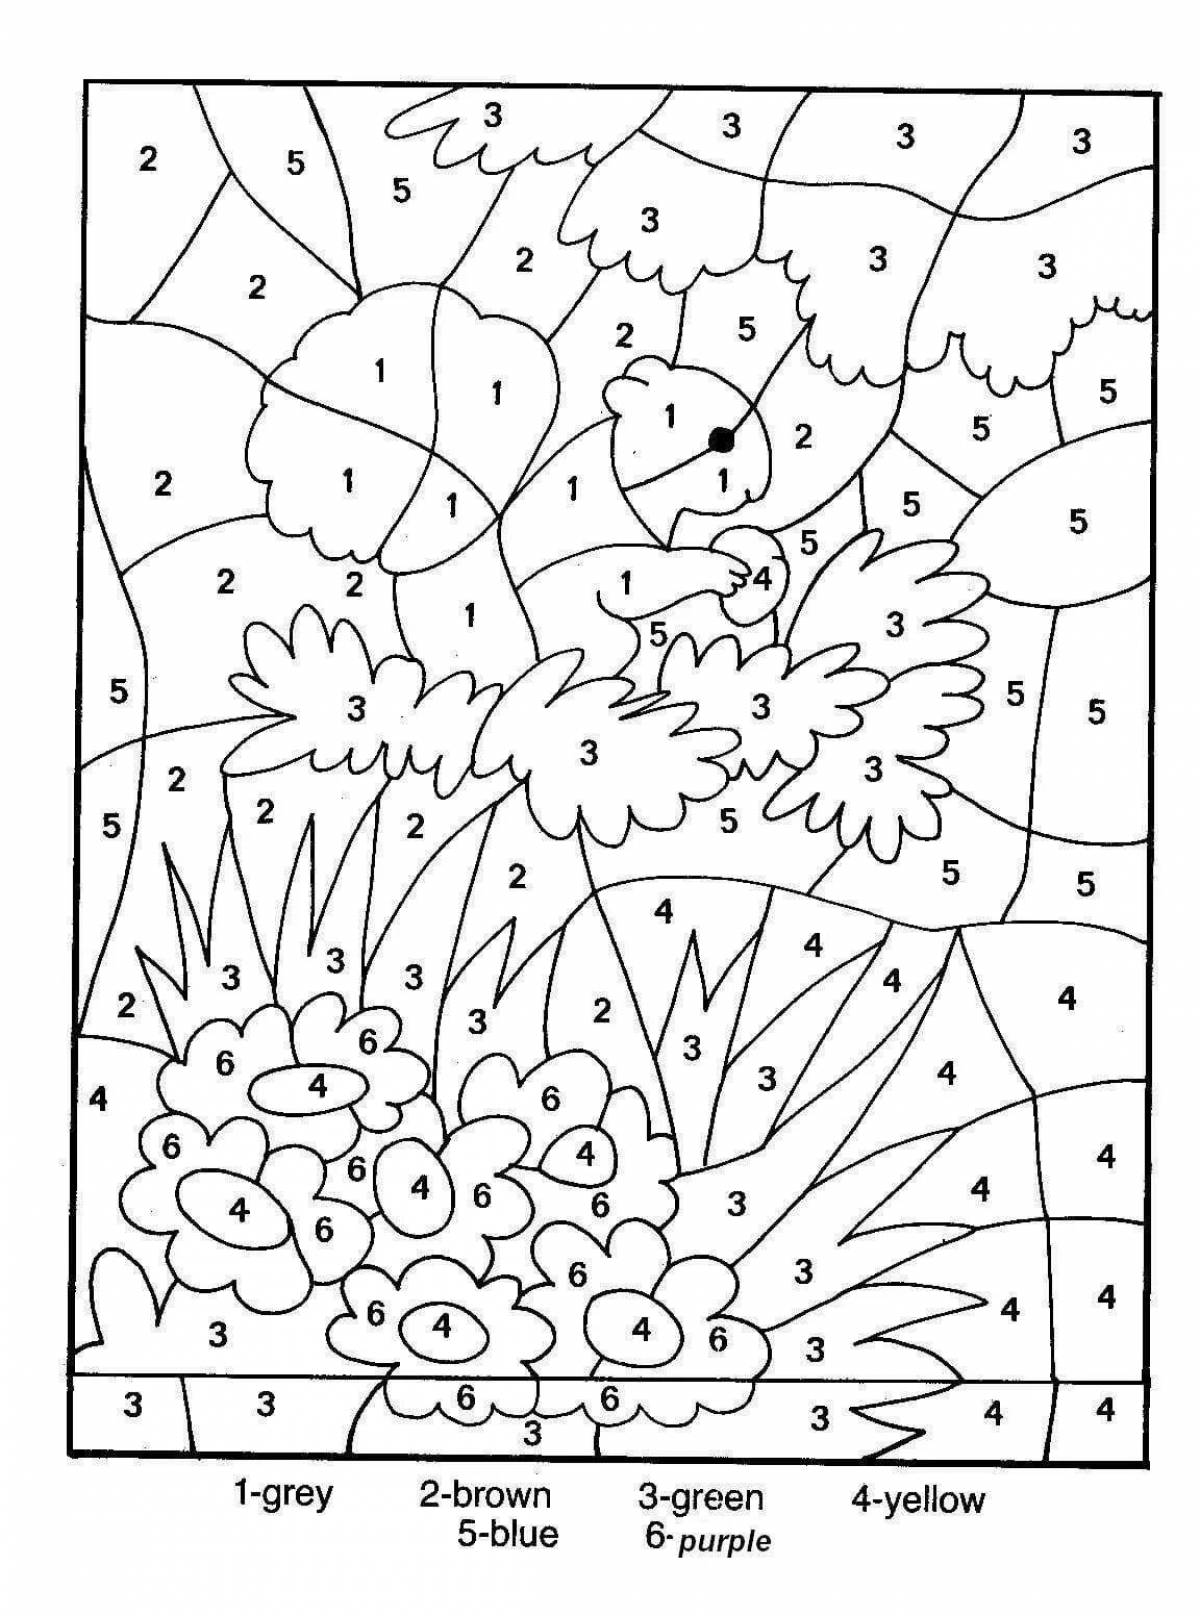 Unique coloring book, small in numbers